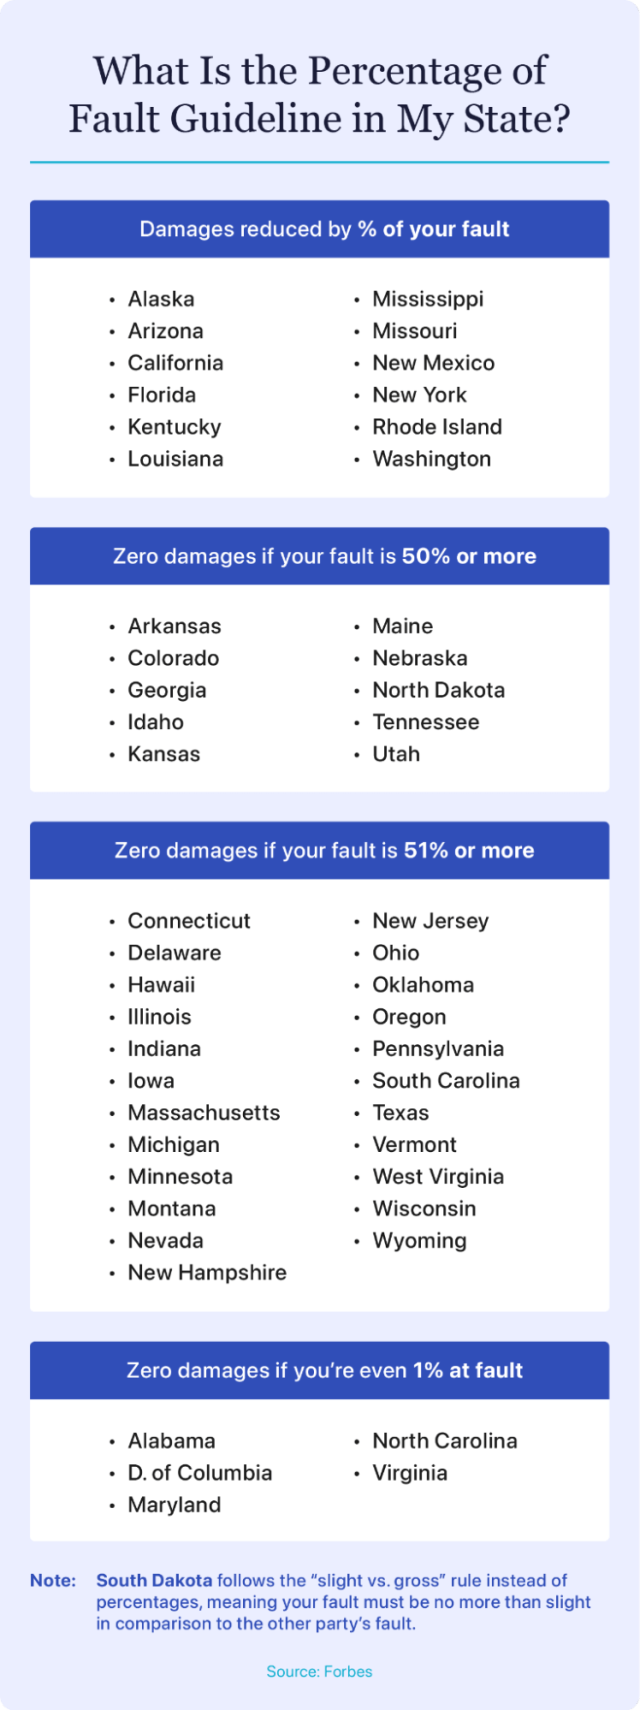 Tables showing the percentage of fault guidelines for each state.